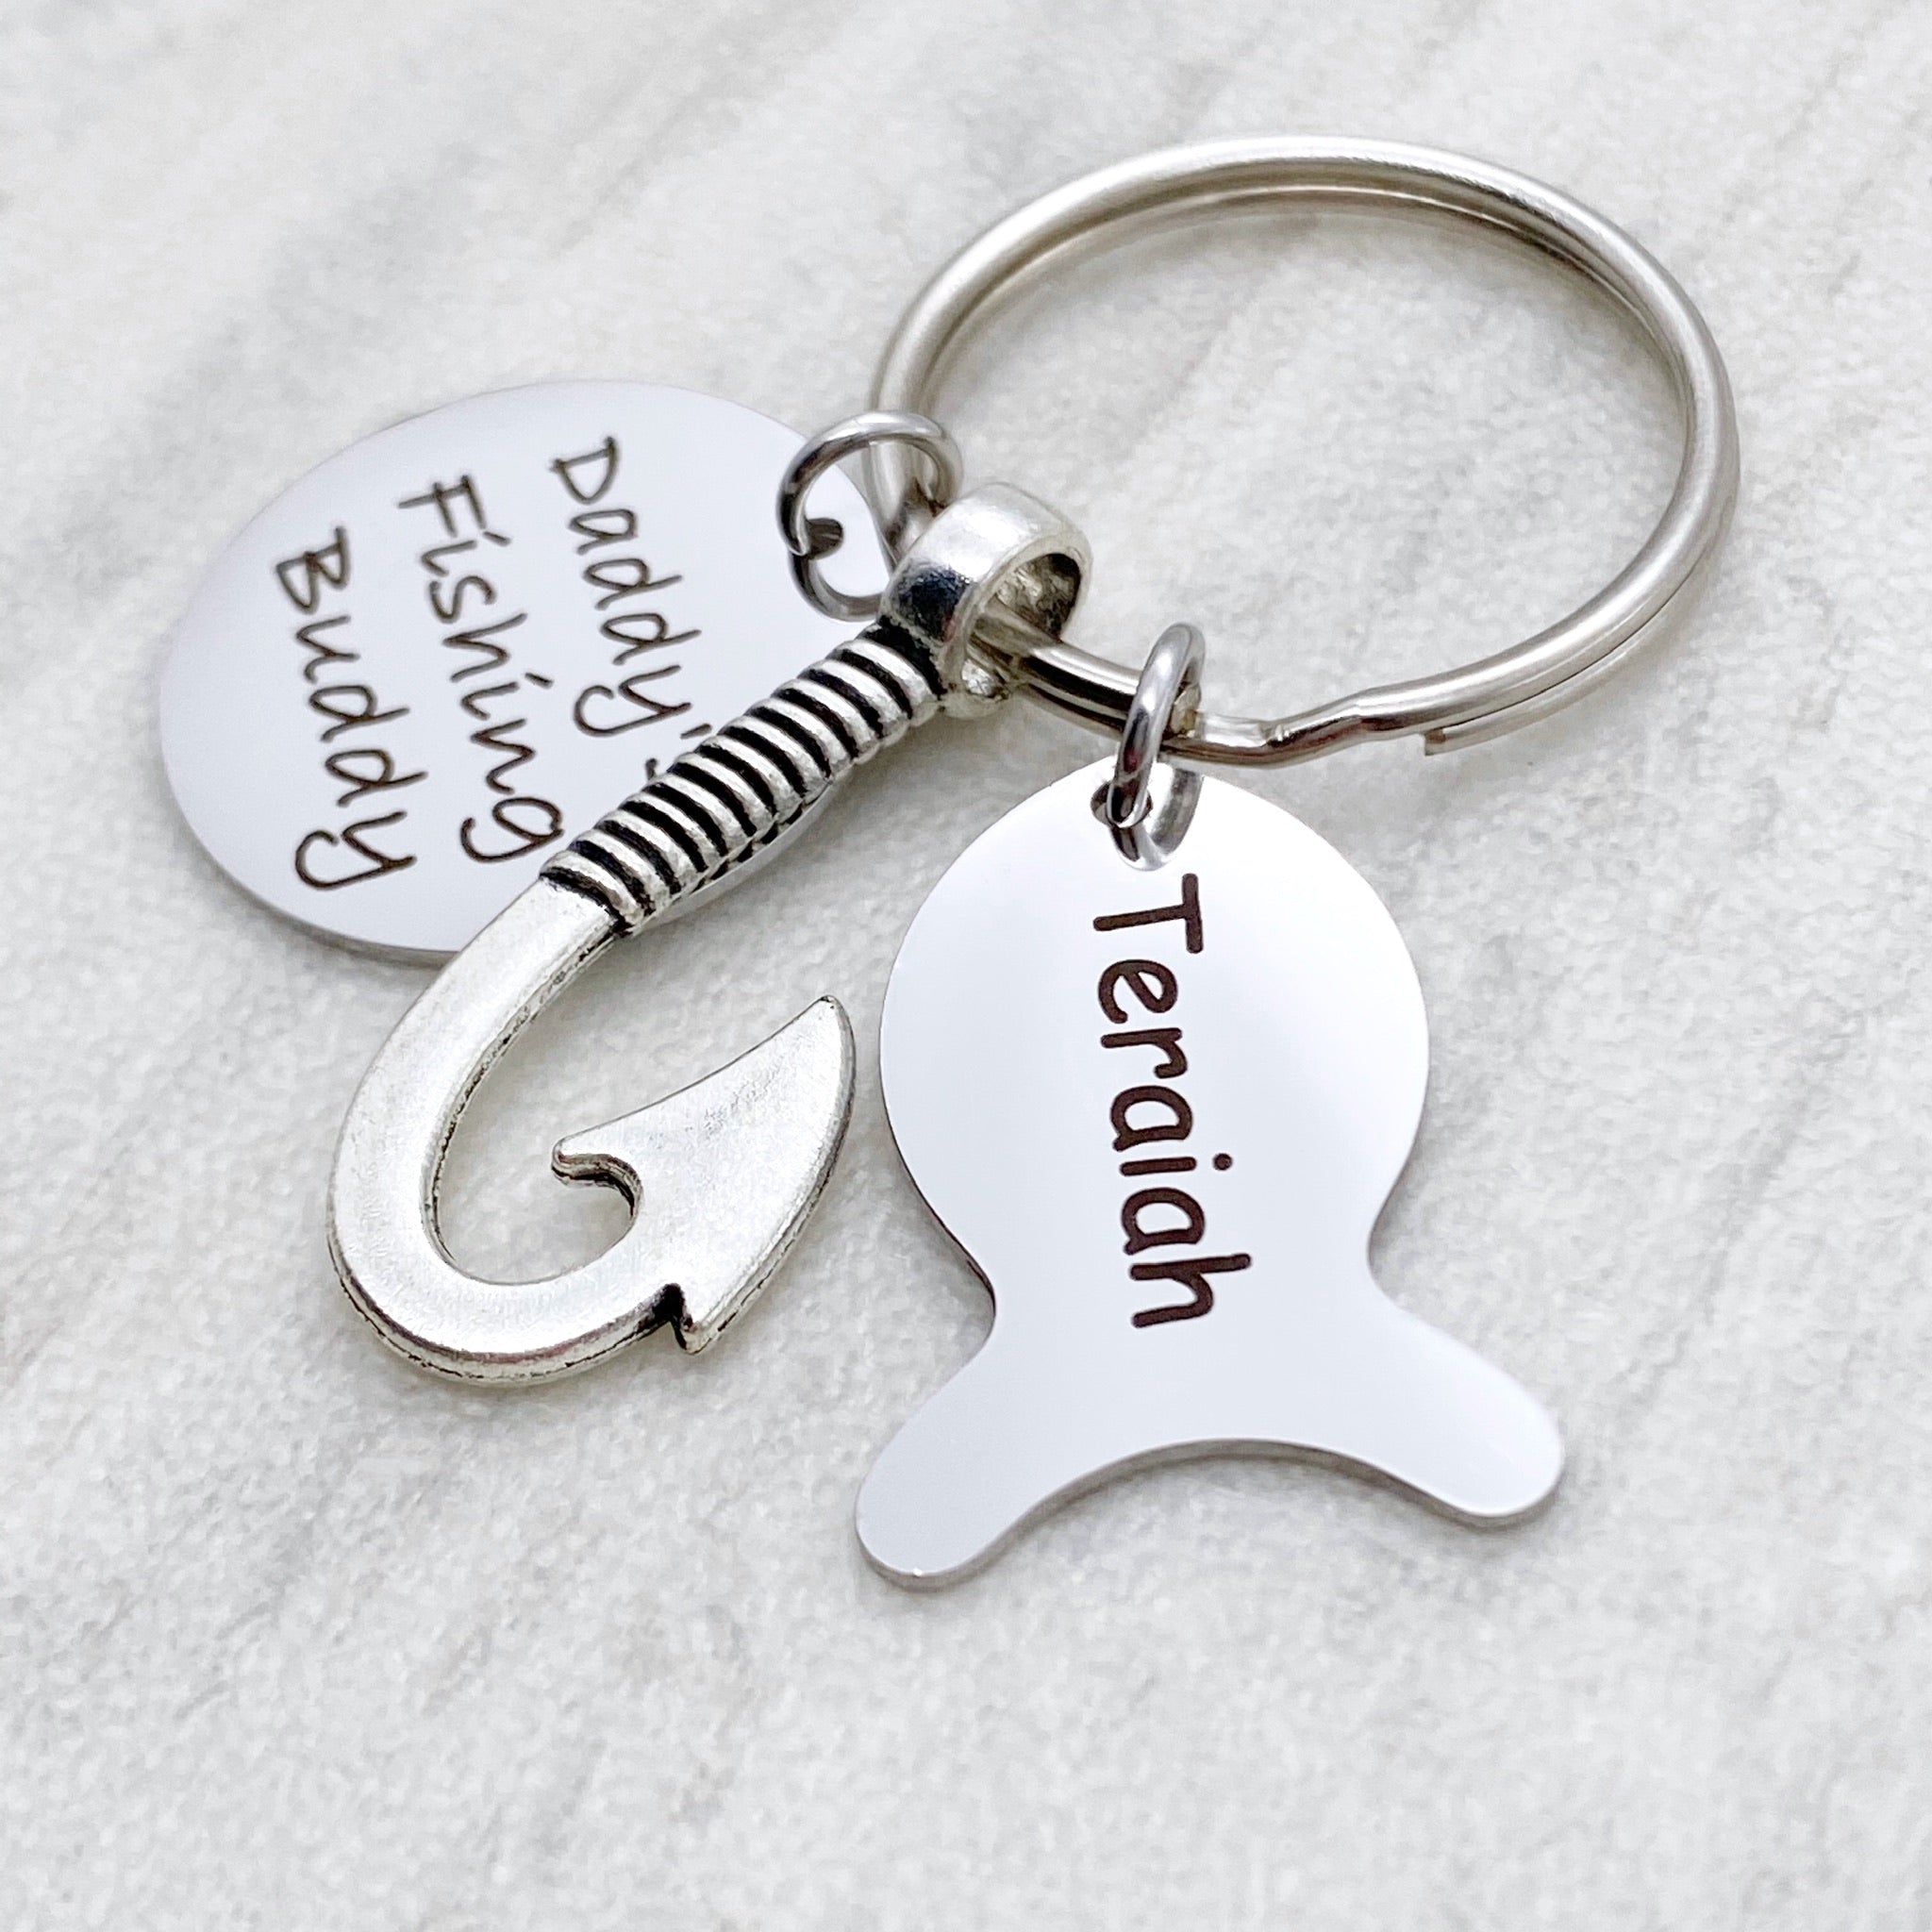 Fishing Keychain for Dad with Kids Personalized Fish Name Tags